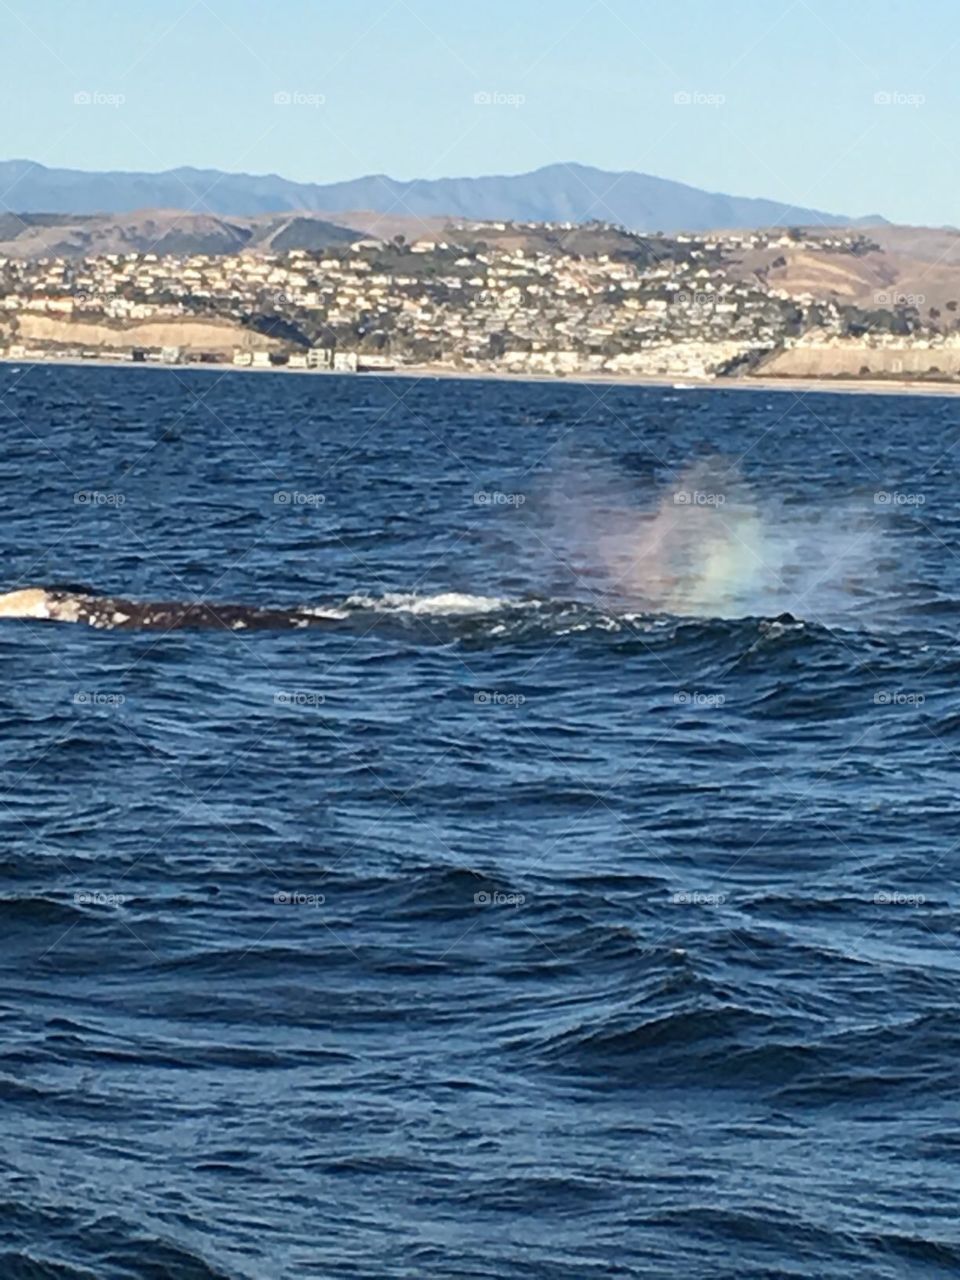 Whale blowing at Dana Point California